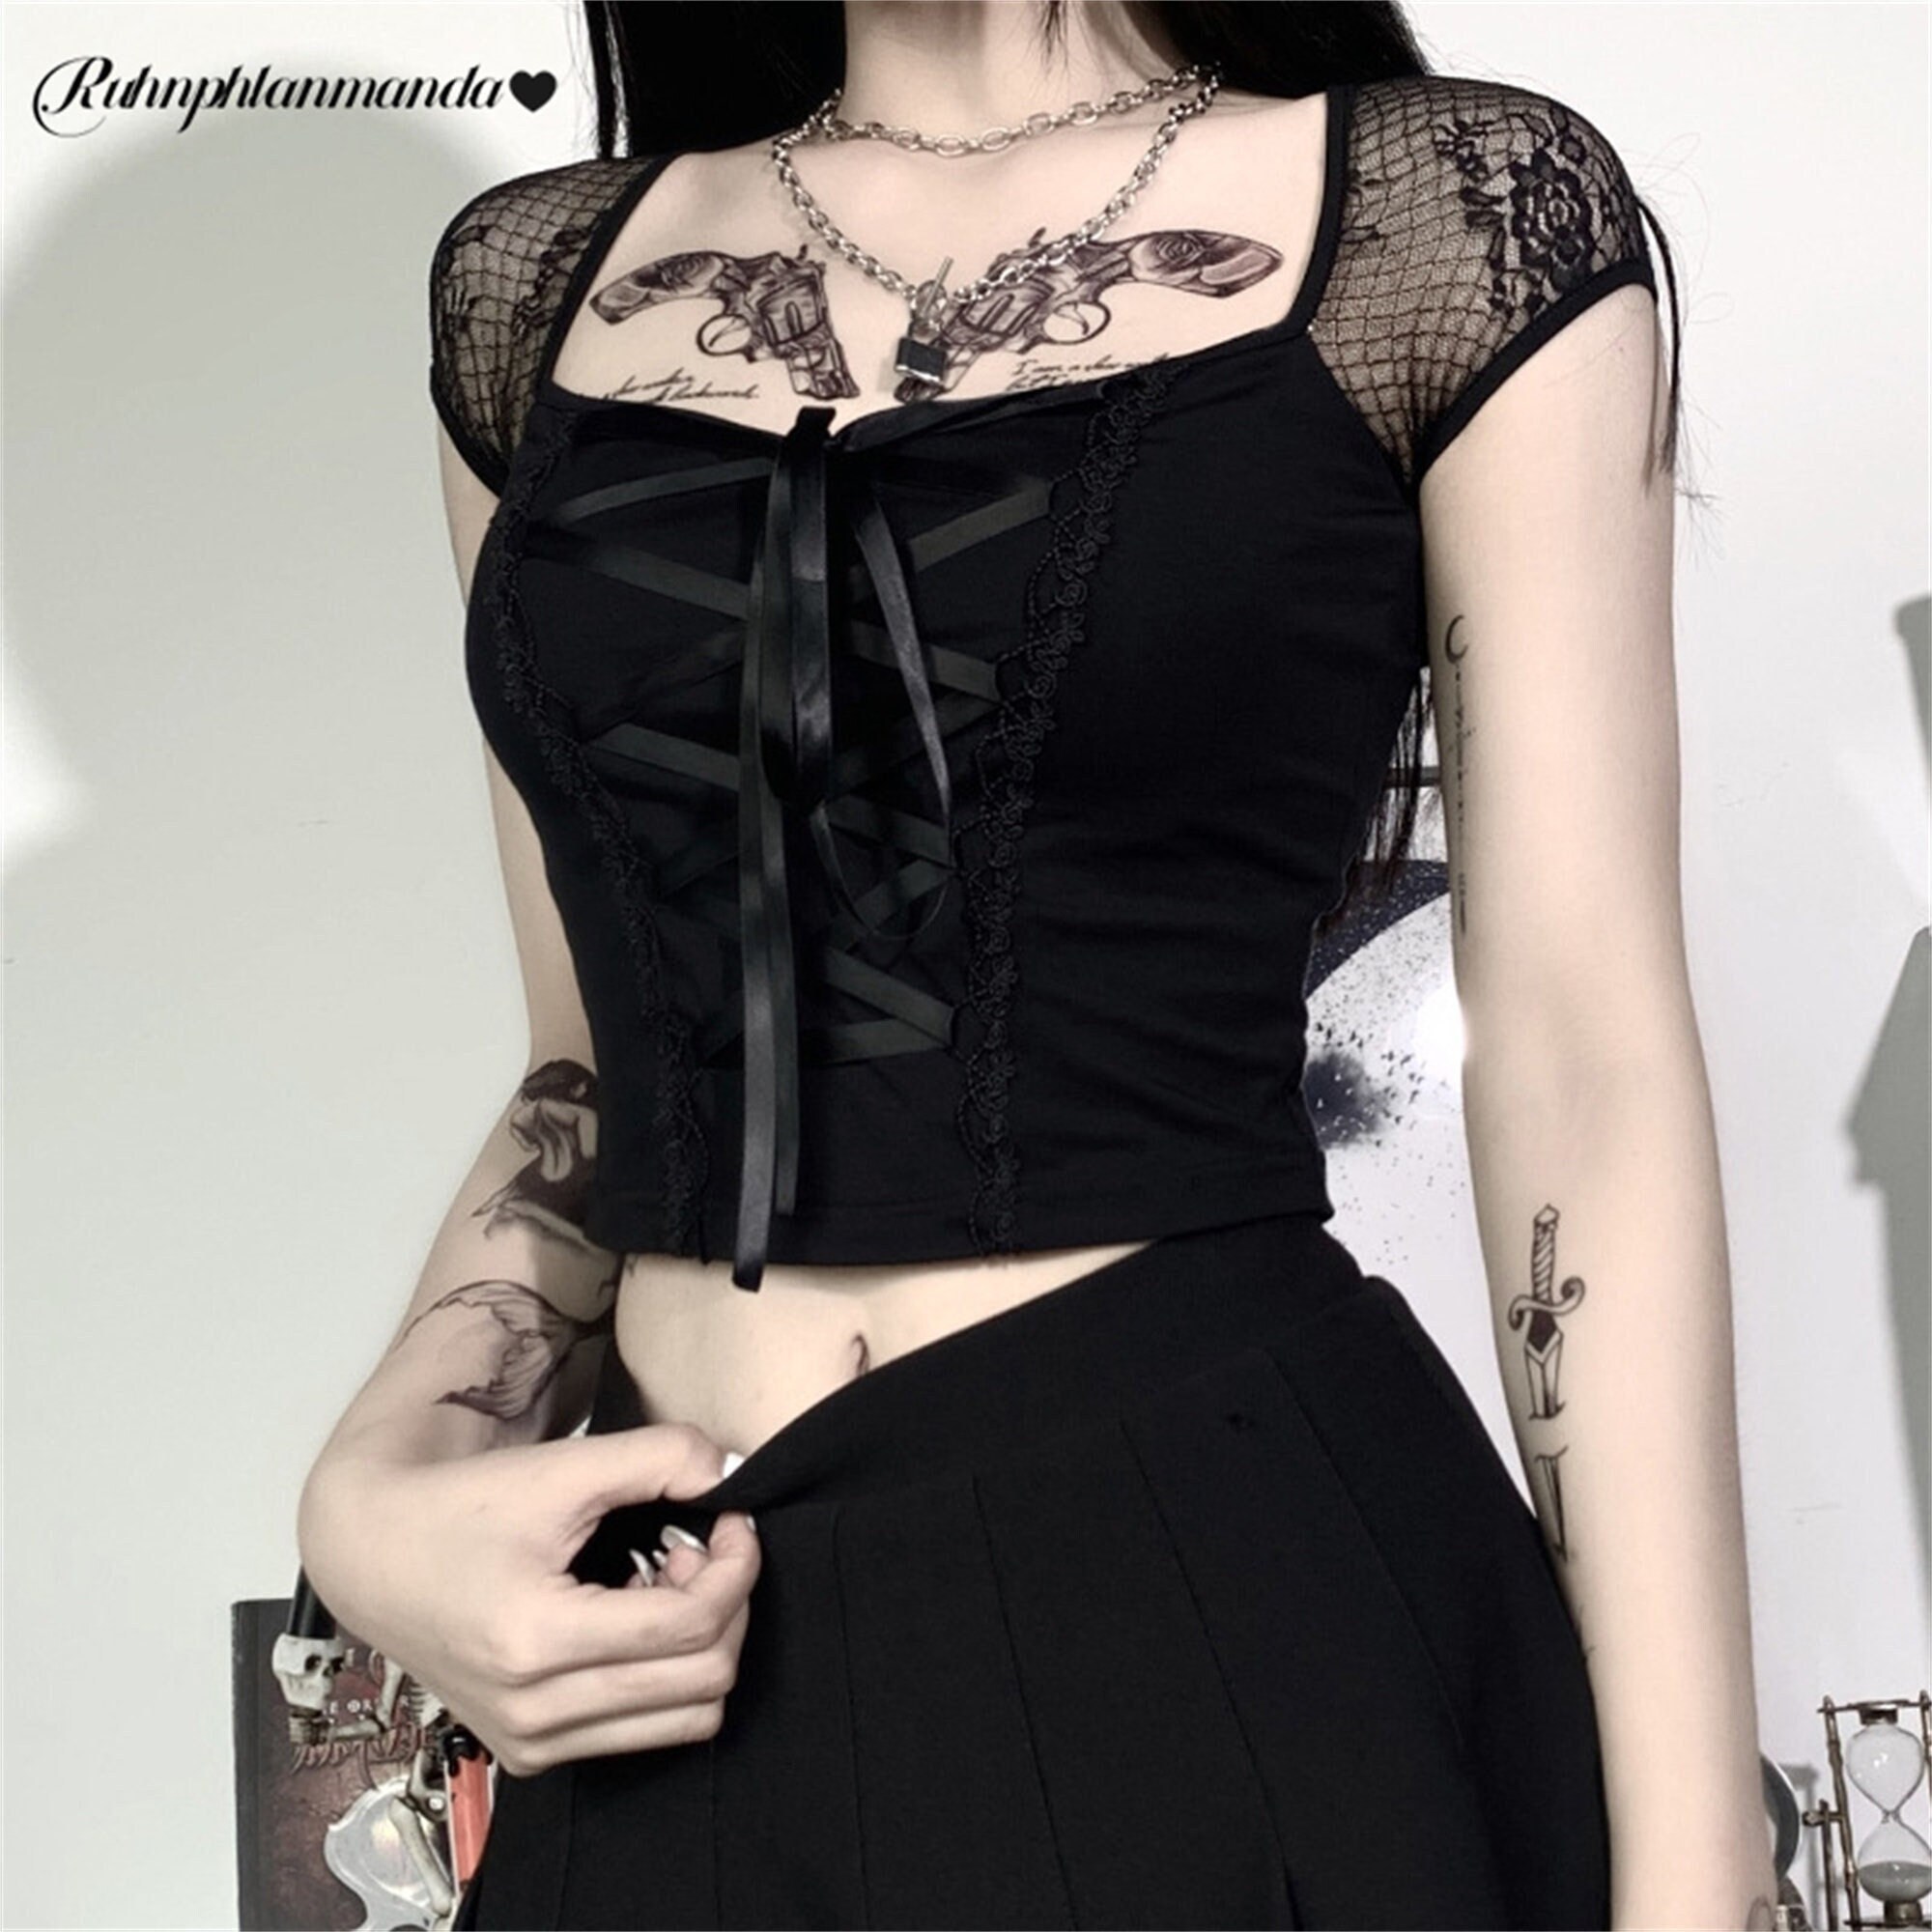 Goth Bodycon Bandage Lace Short Sleeve Top Women's Lace Shoulder & Bandage Decorated Sleveless Sexy Black Crop Top Gothicwear Punkwear